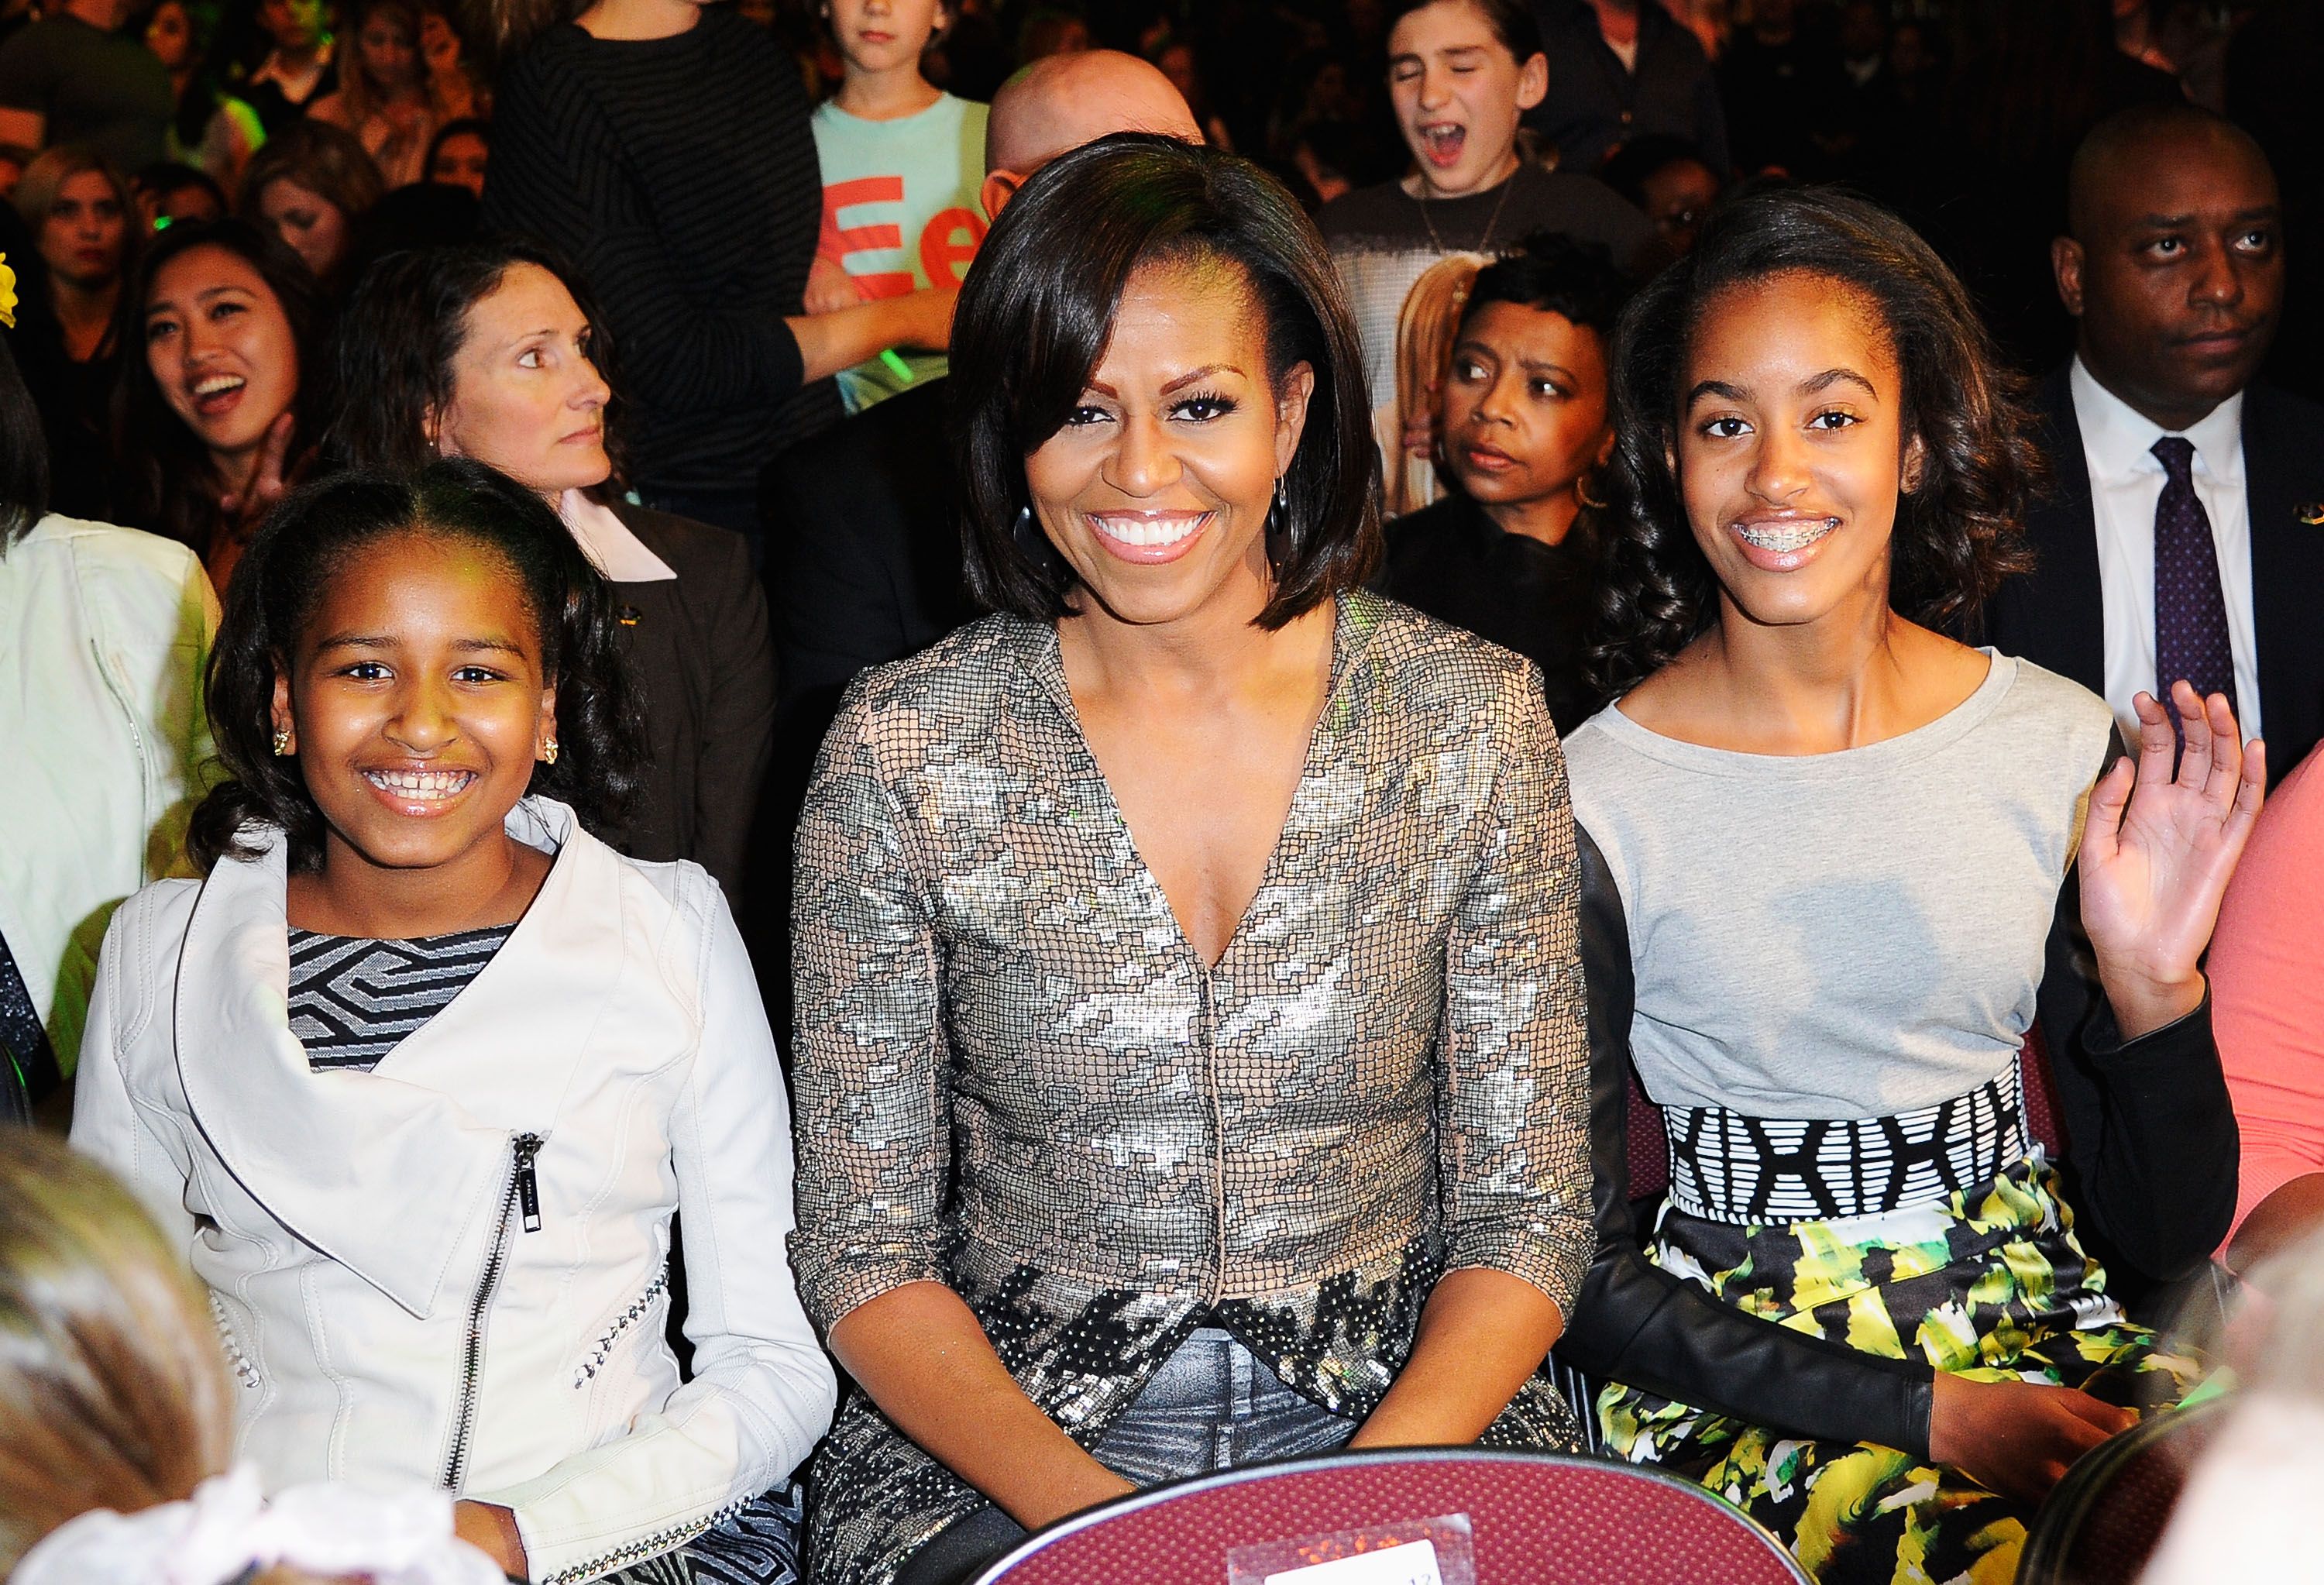 Sasha, Michelle, and Malia Obama at Nickelodeon's 25th Annual Kids' Choice Awards on March 31, 2012, in Los Angeles, California | Photo: Getty Images